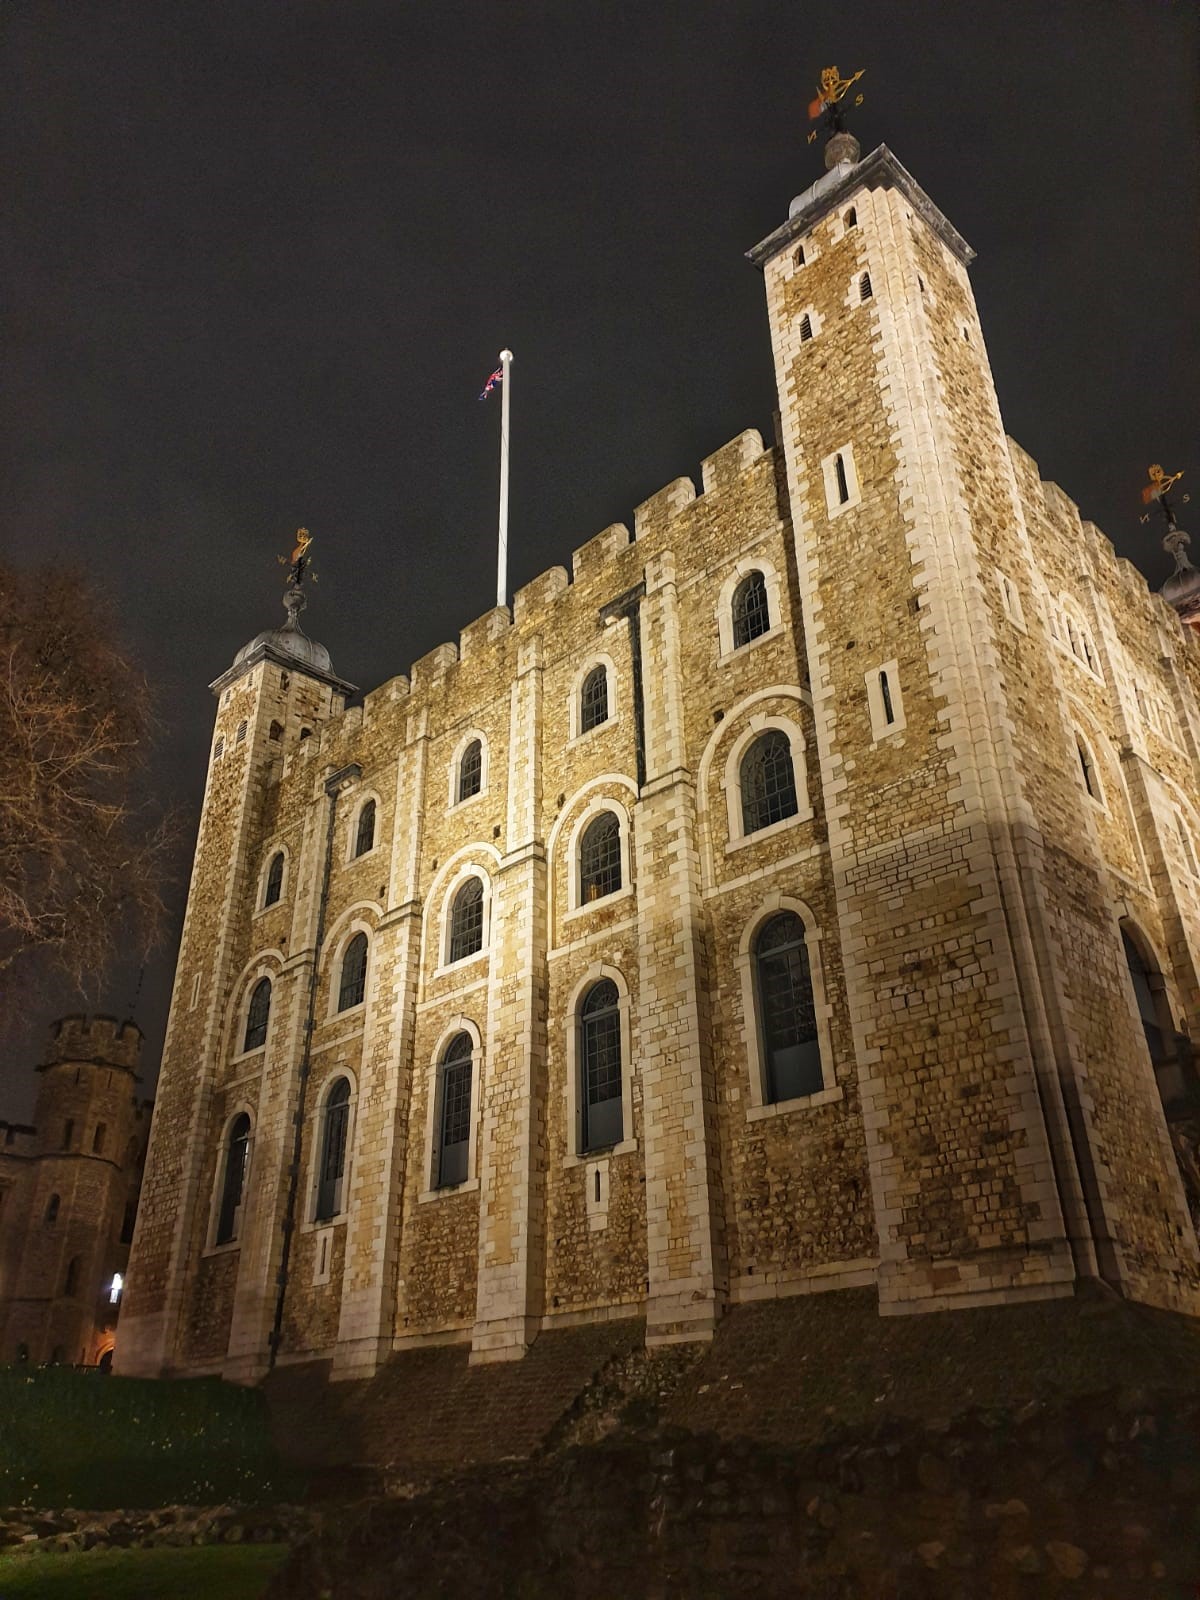 An image of the White Tower within the Tower of London. 